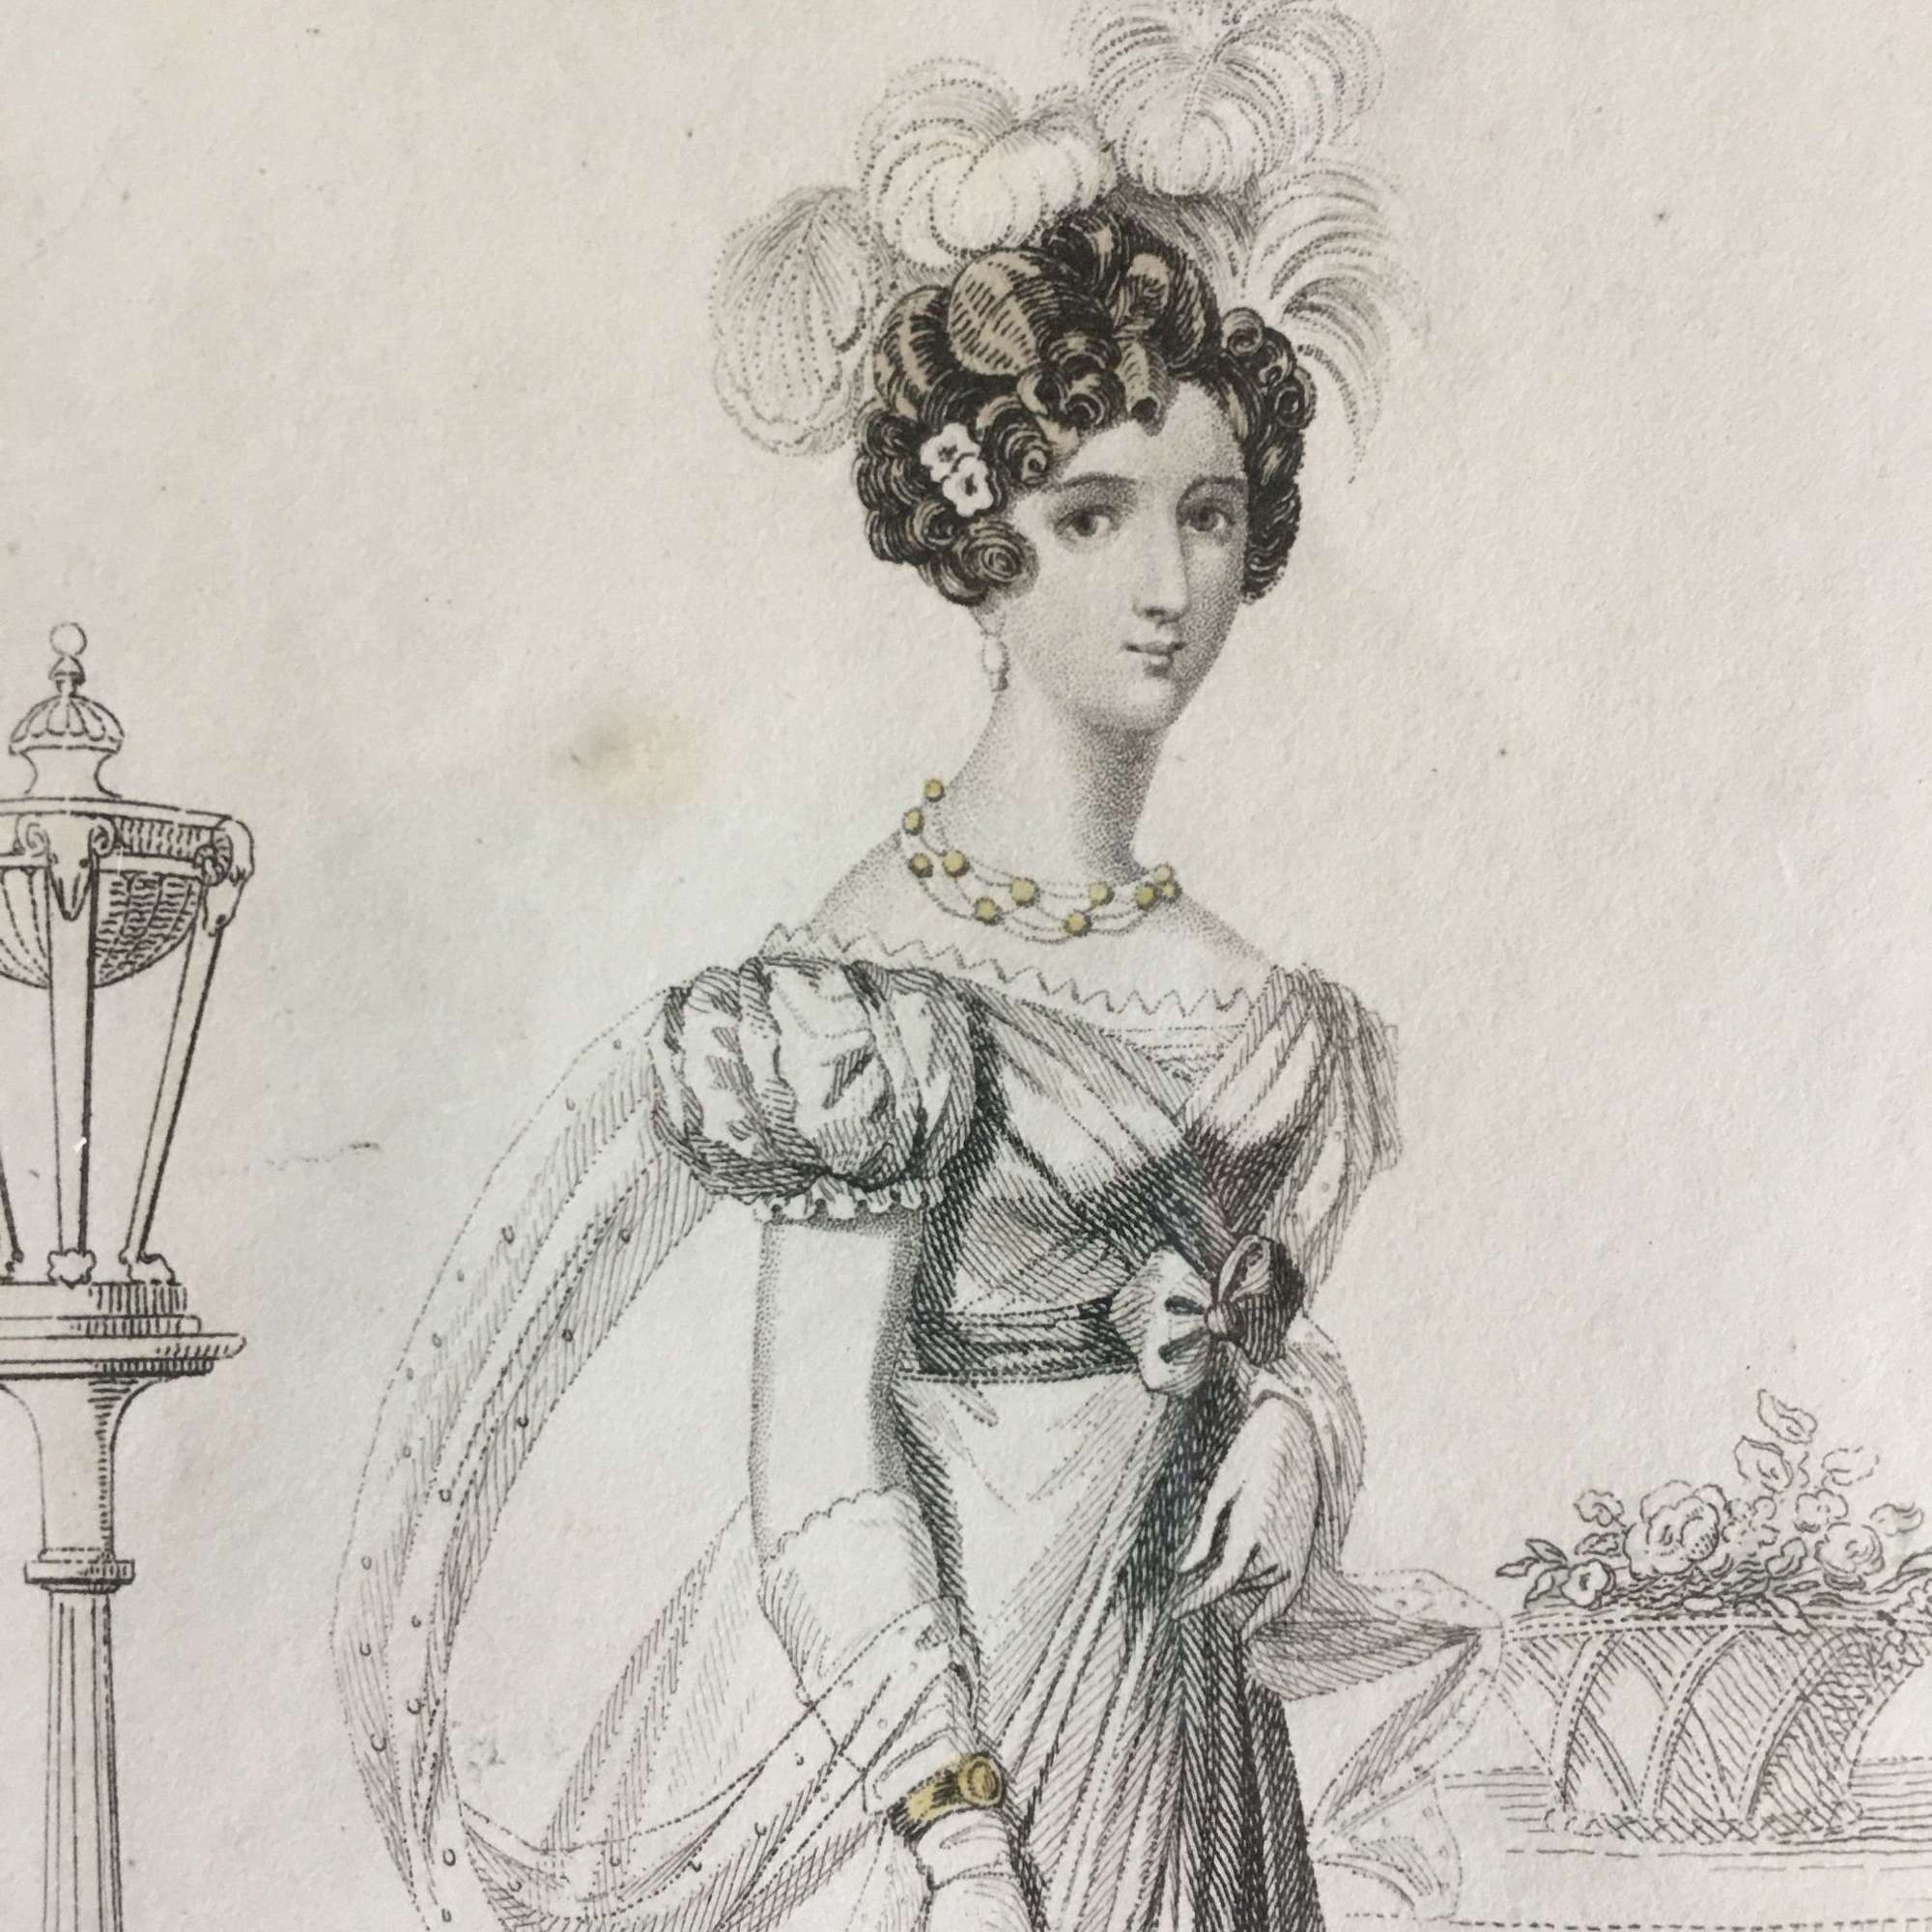 1825 Print of Lady in ‘Evening Full Dress’